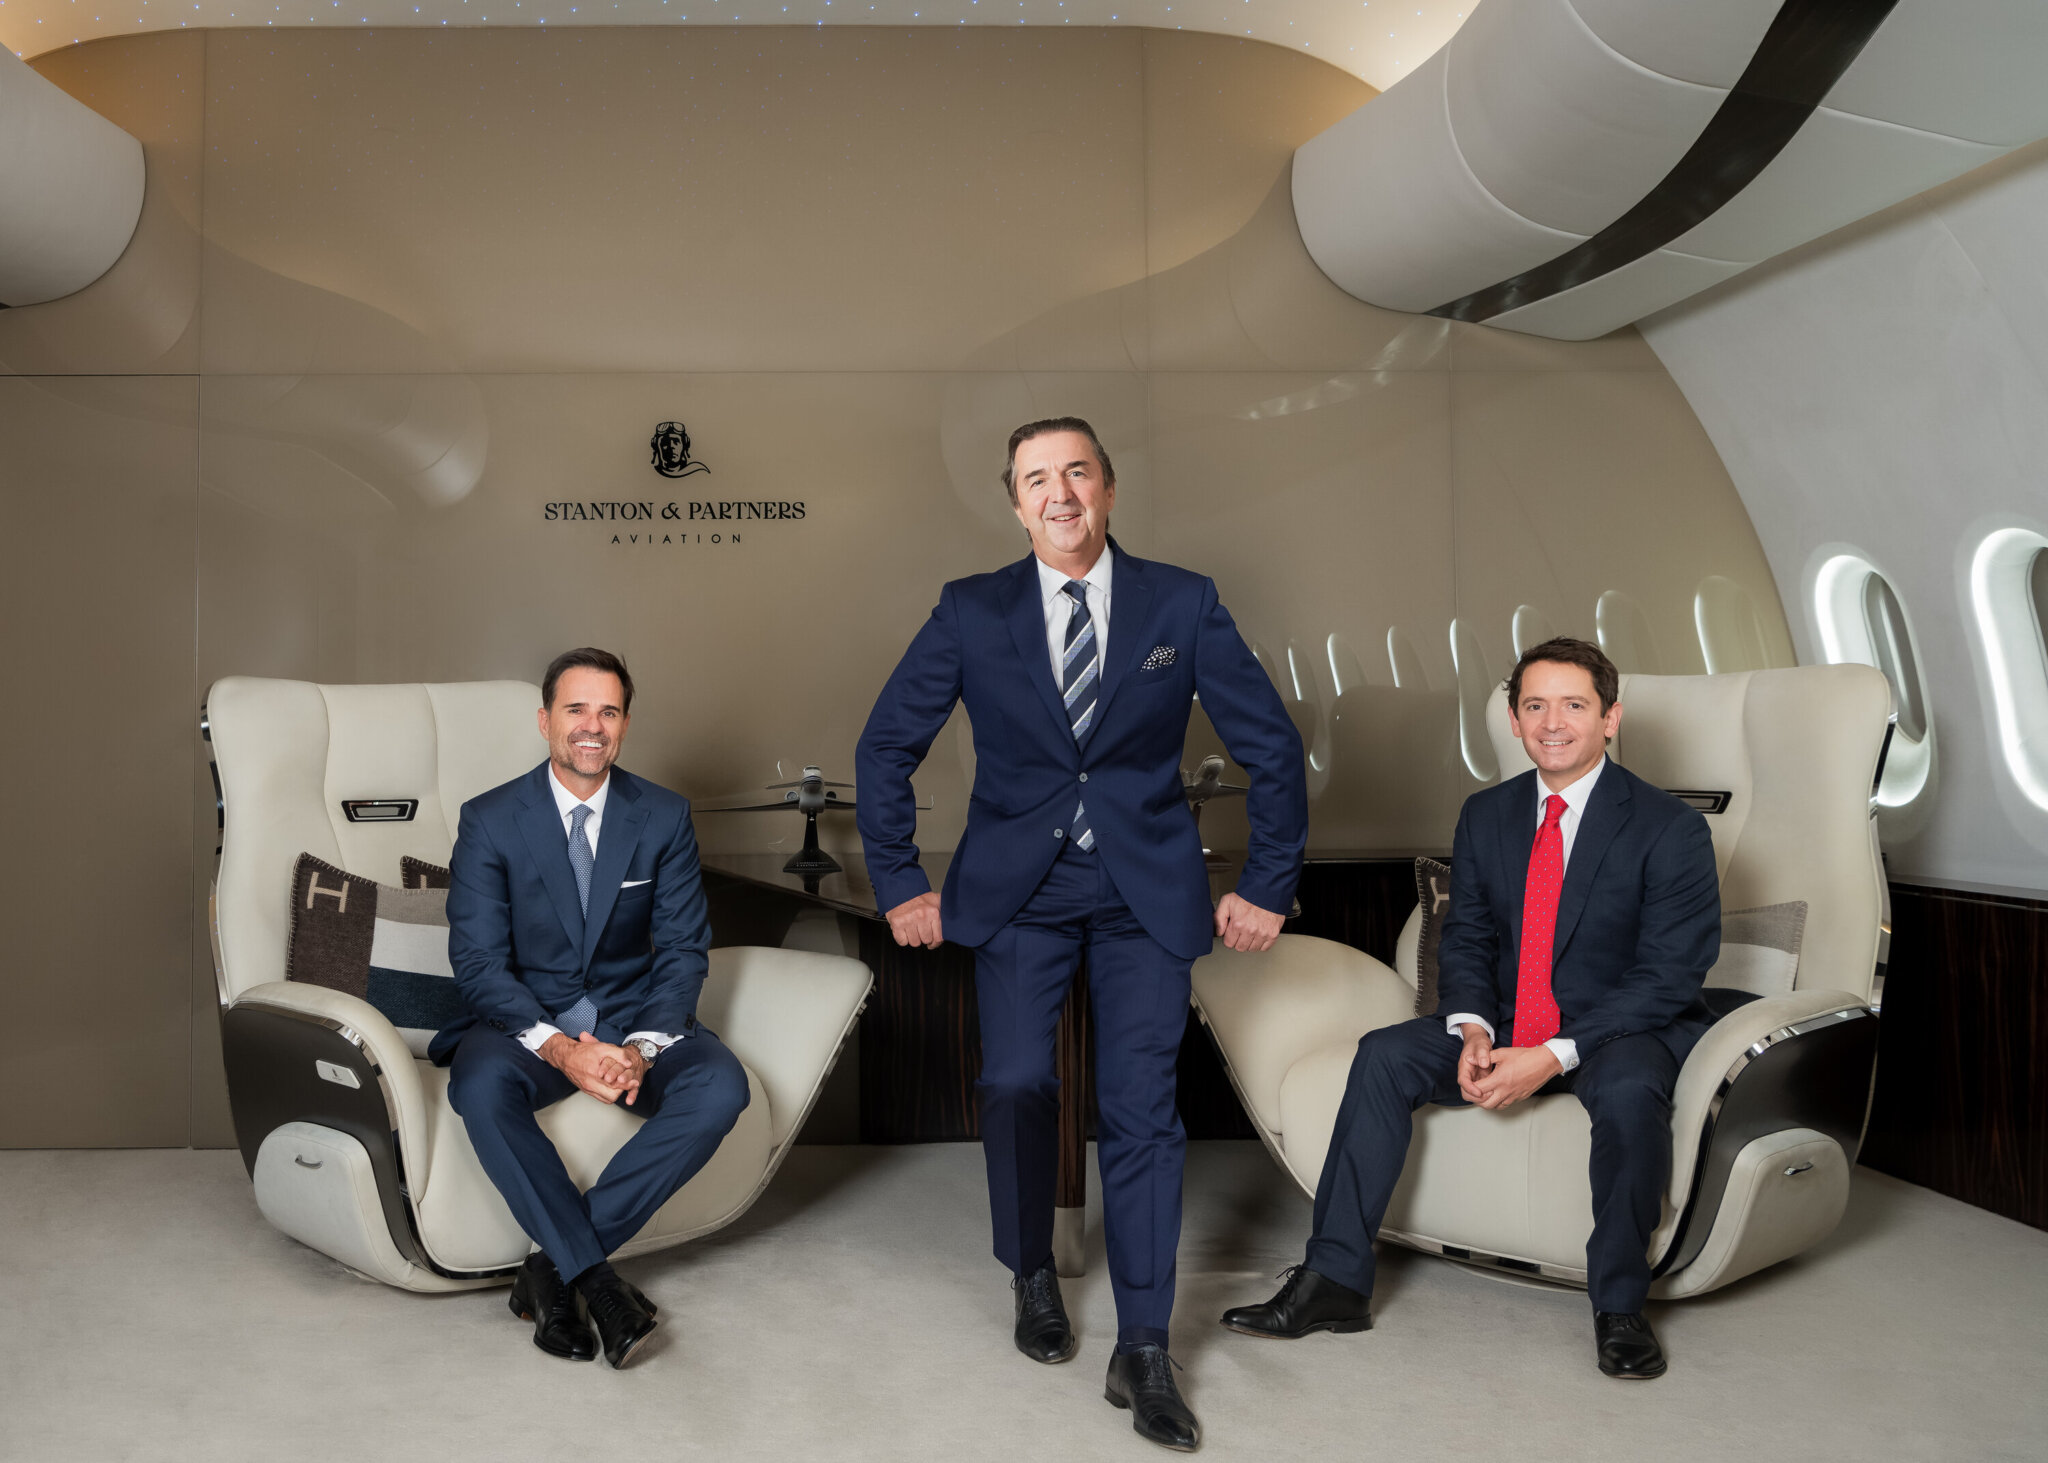 Stanton & Partners Aviation takes to new heights